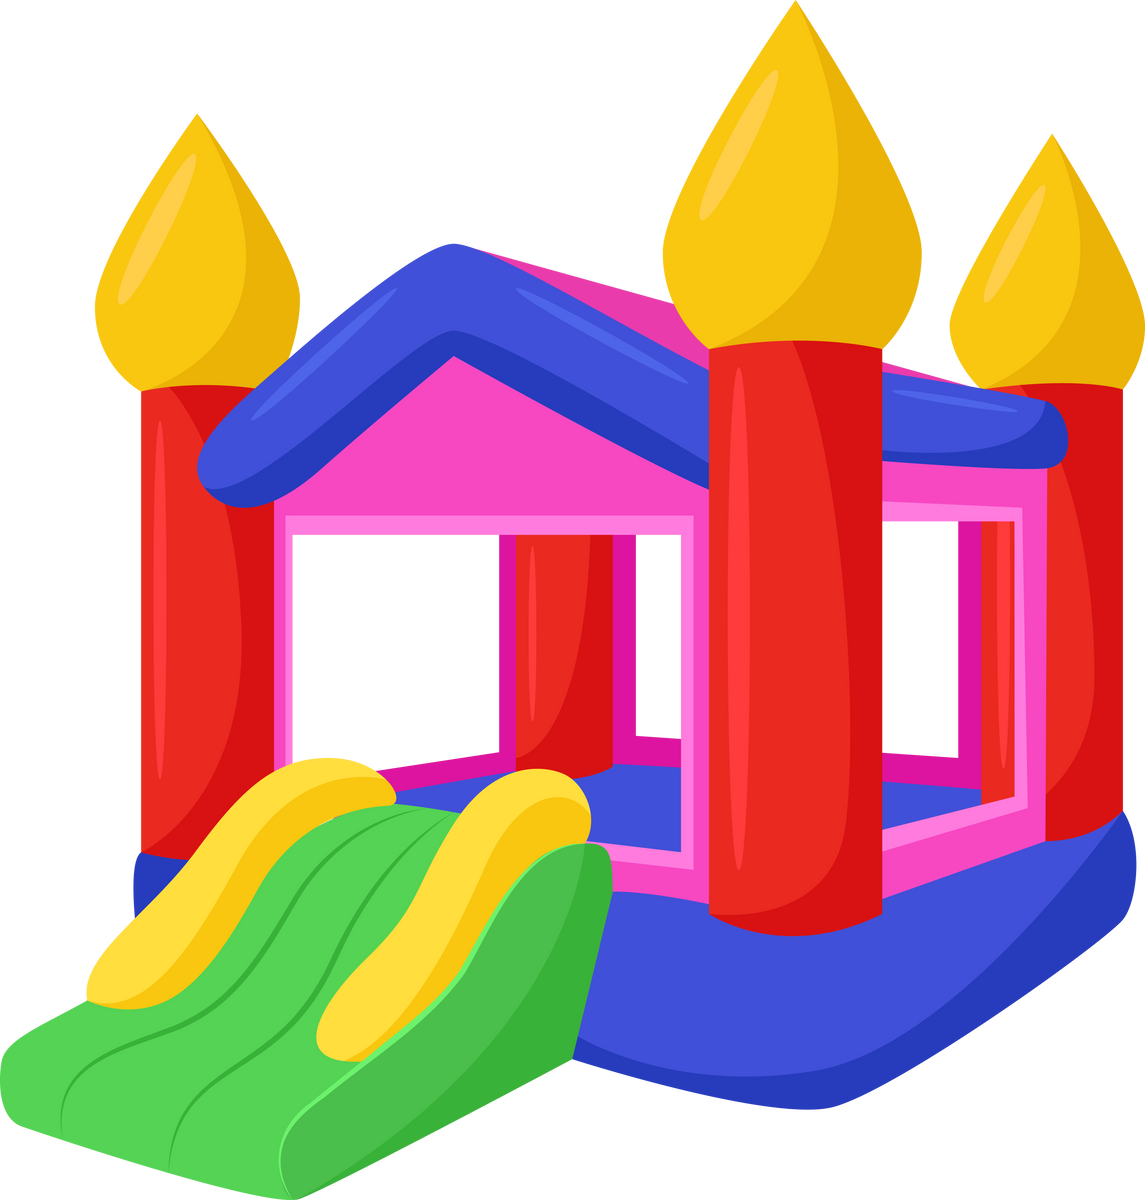 Inflatable caste for kids vector. Drawing of inflated bouncy trampolines with slides. Childhood concept